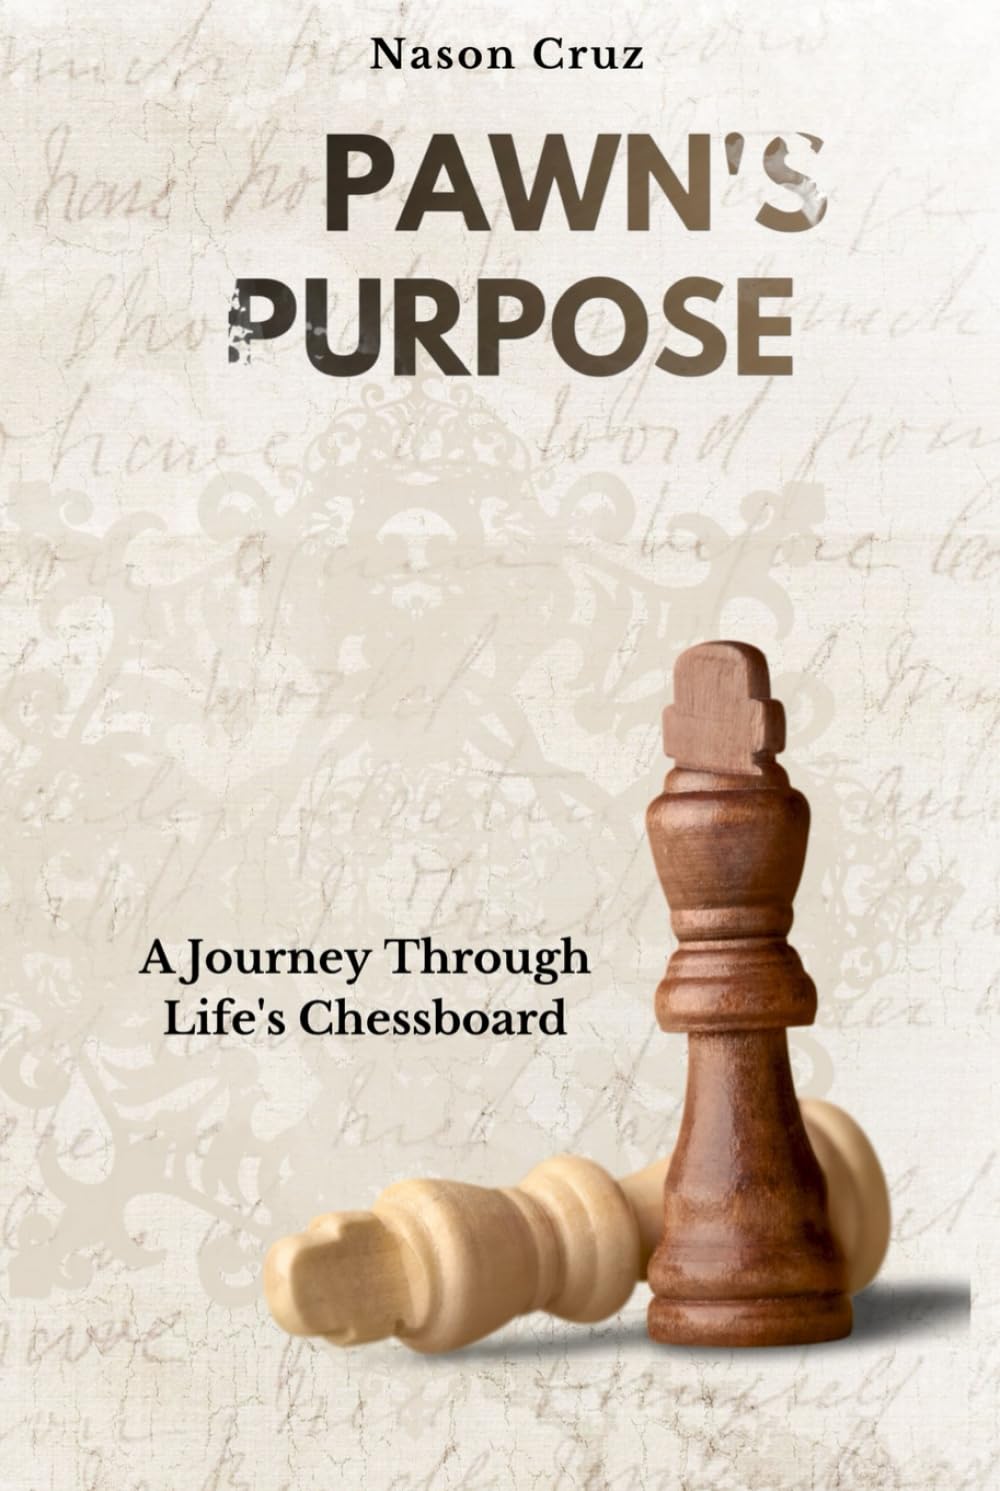 Pawn's Purpose: "A Journey through Life's Chessboard"